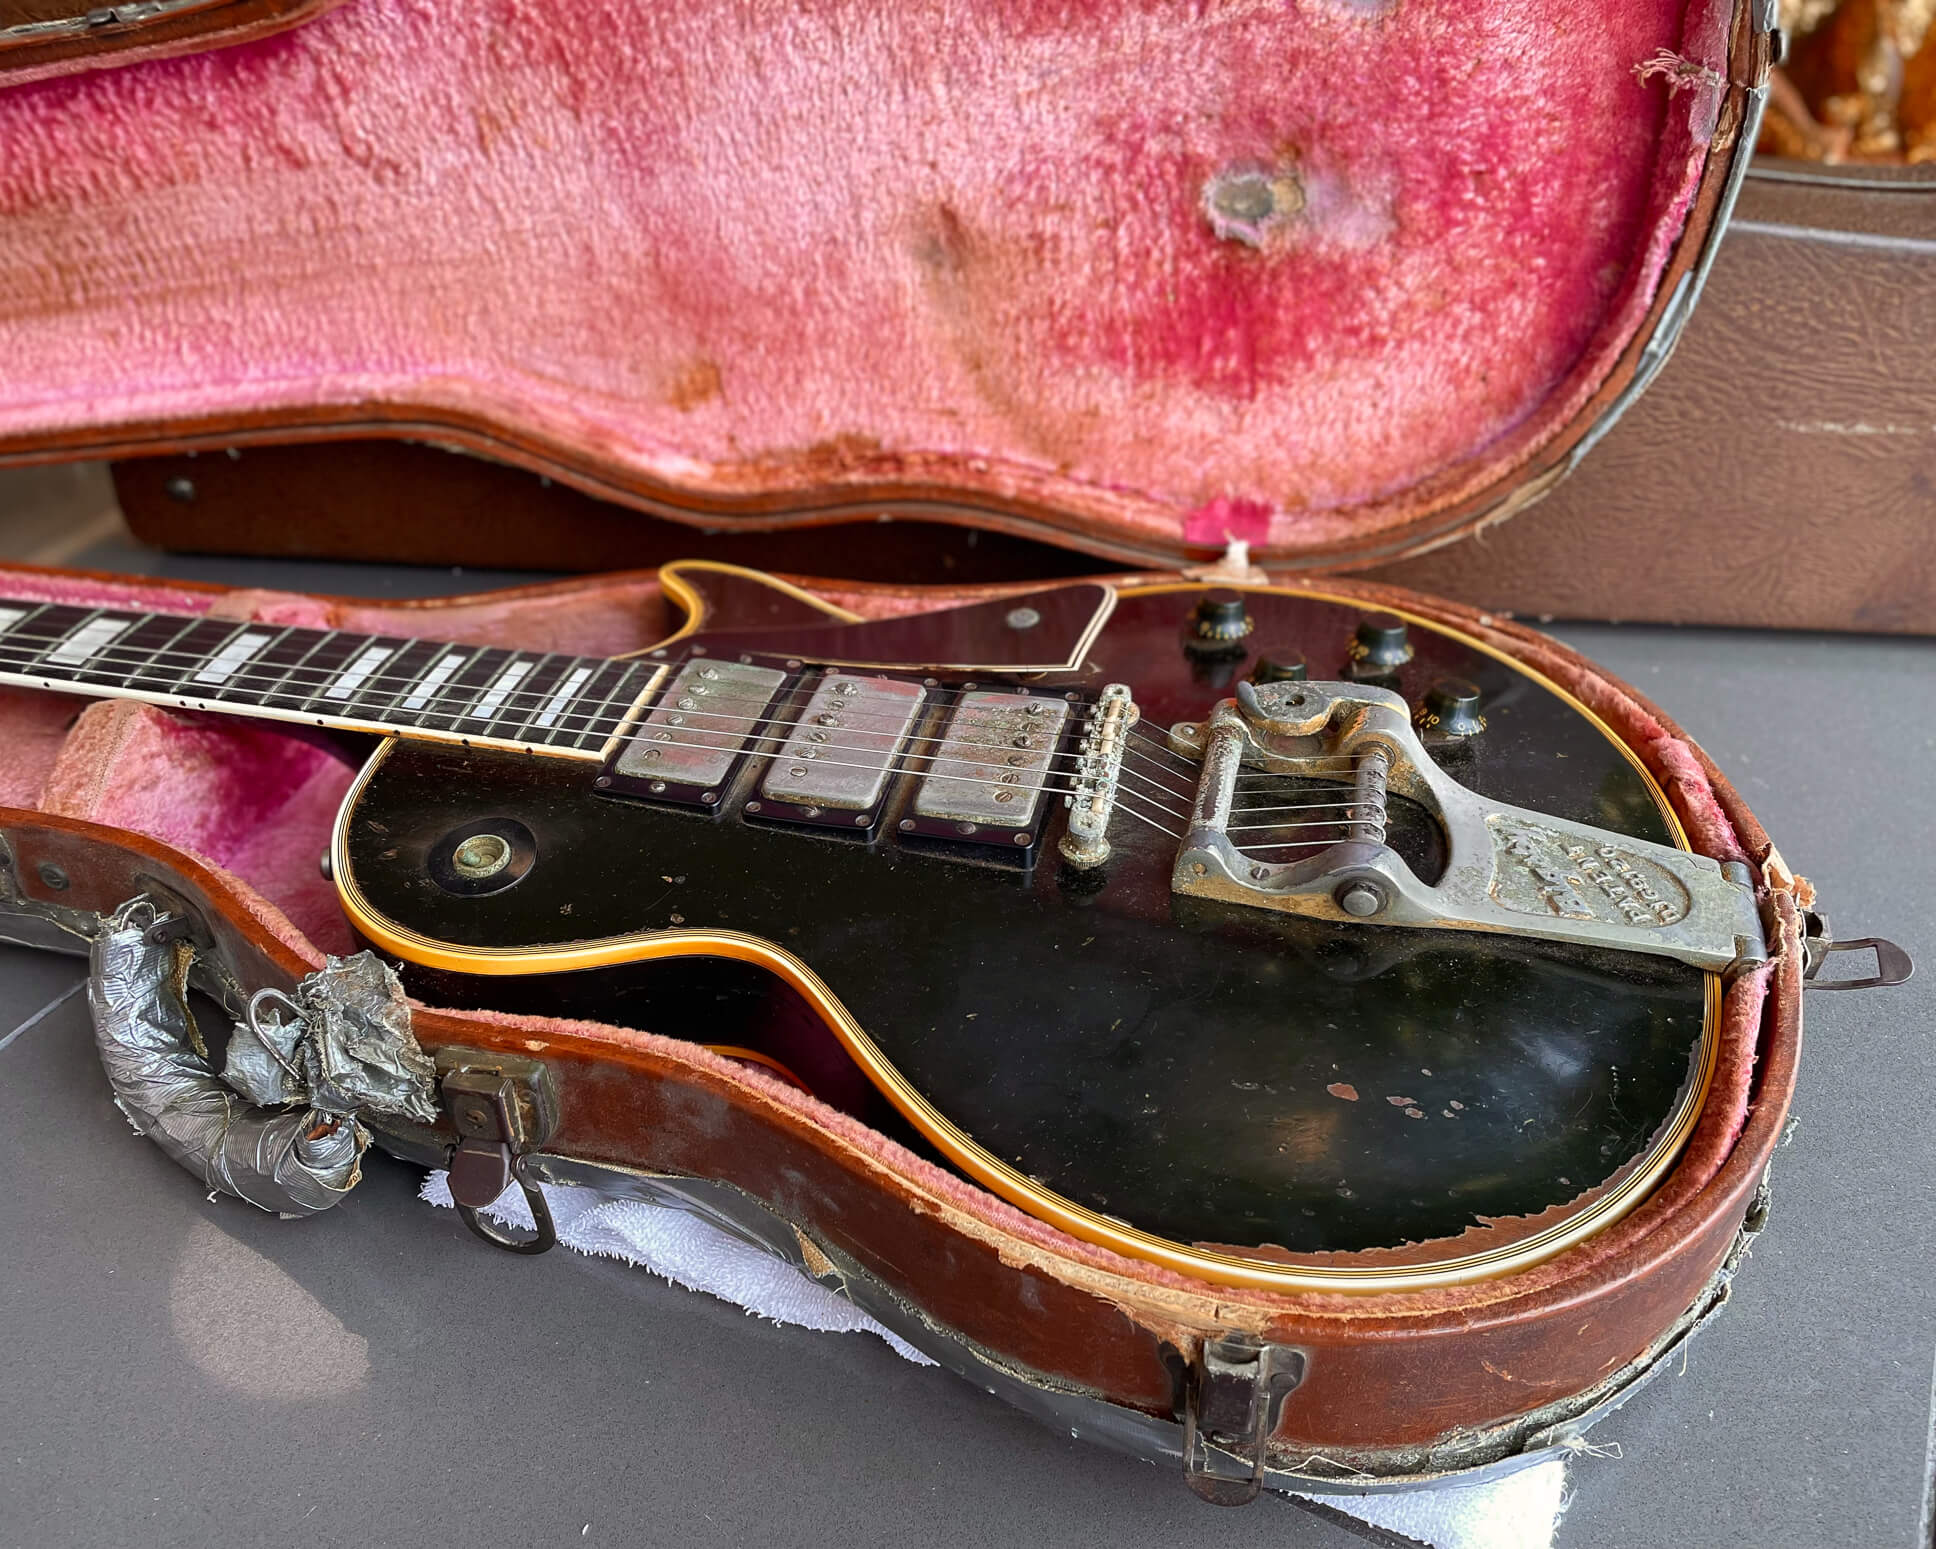 Les Paul Custom 1960 in Black finish with Bigsby tailpiece